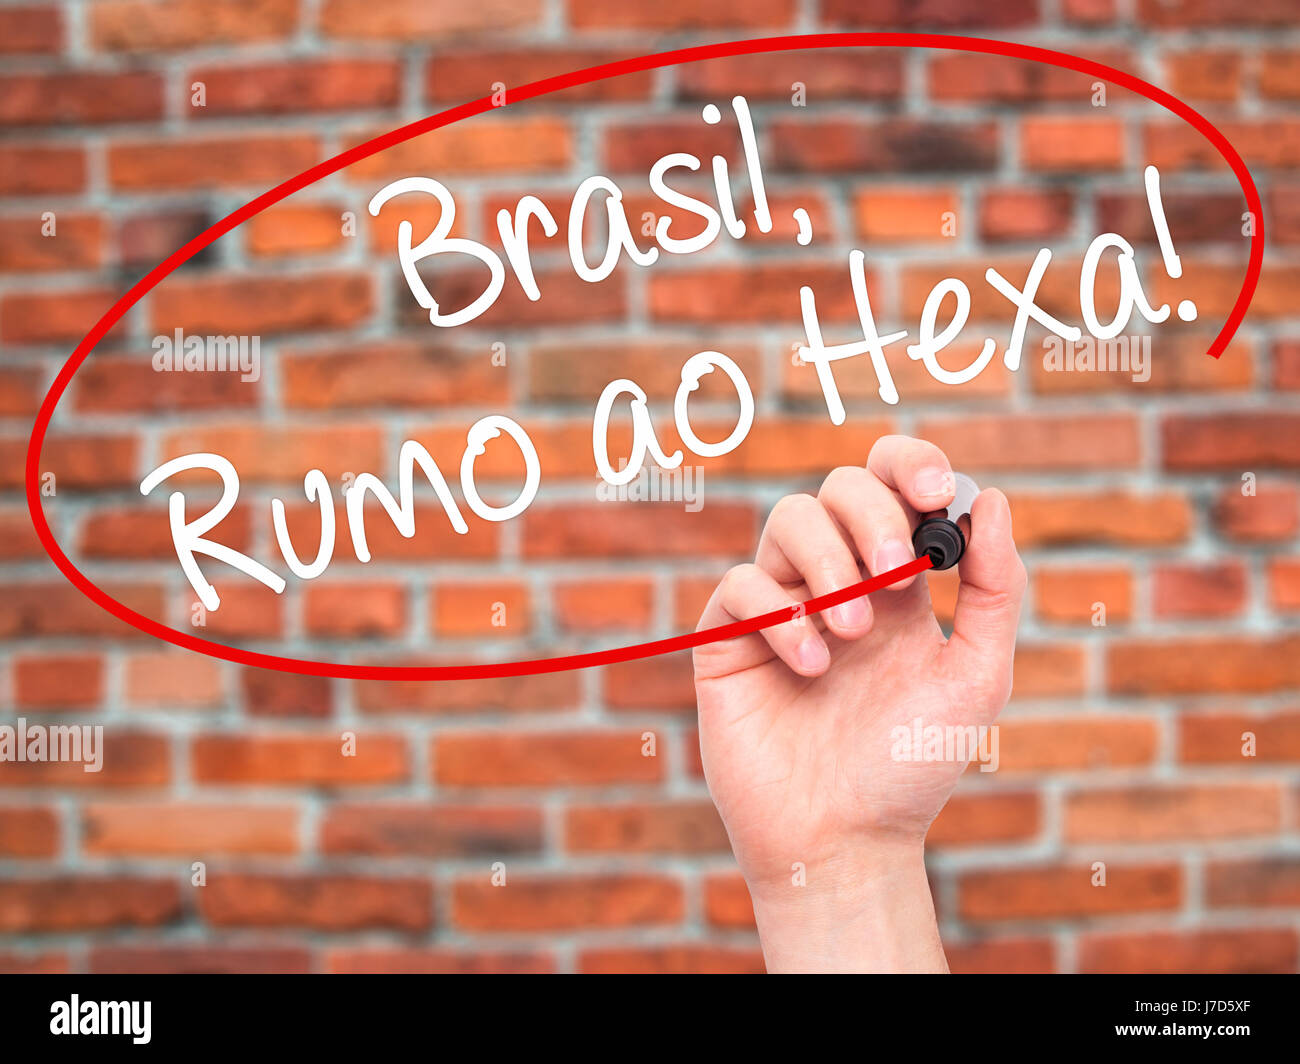 Man Hand writing Brasil, Rumo ao Hexa! with black marker on visual screen. Isolated on background. Business, technology, internet concept. Stock Photo Stock Photo